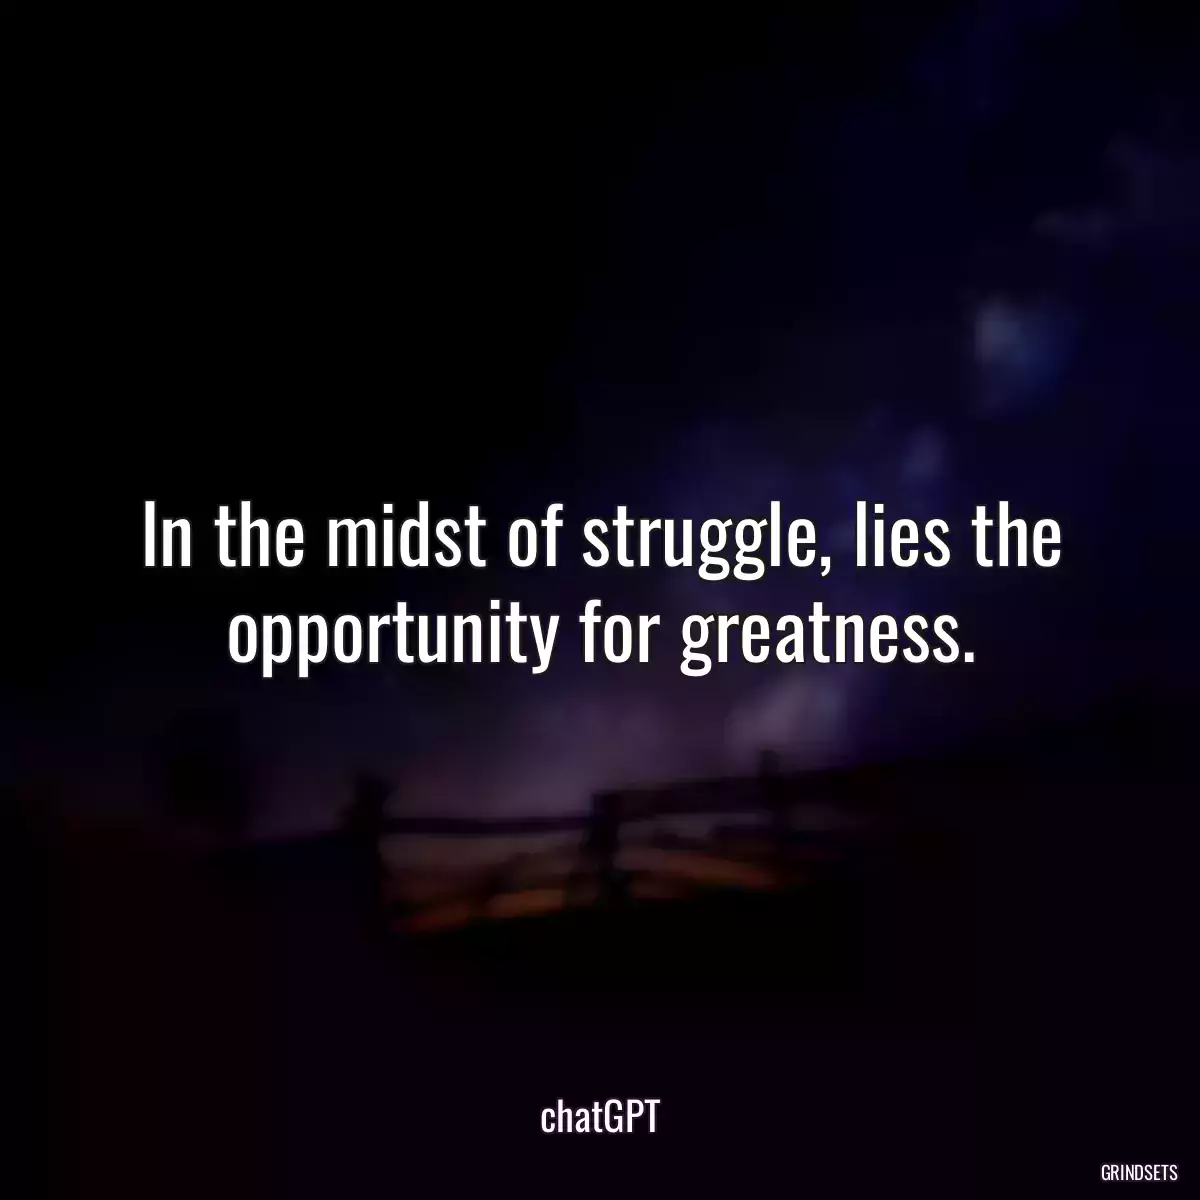 In the midst of struggle, lies the opportunity for greatness.